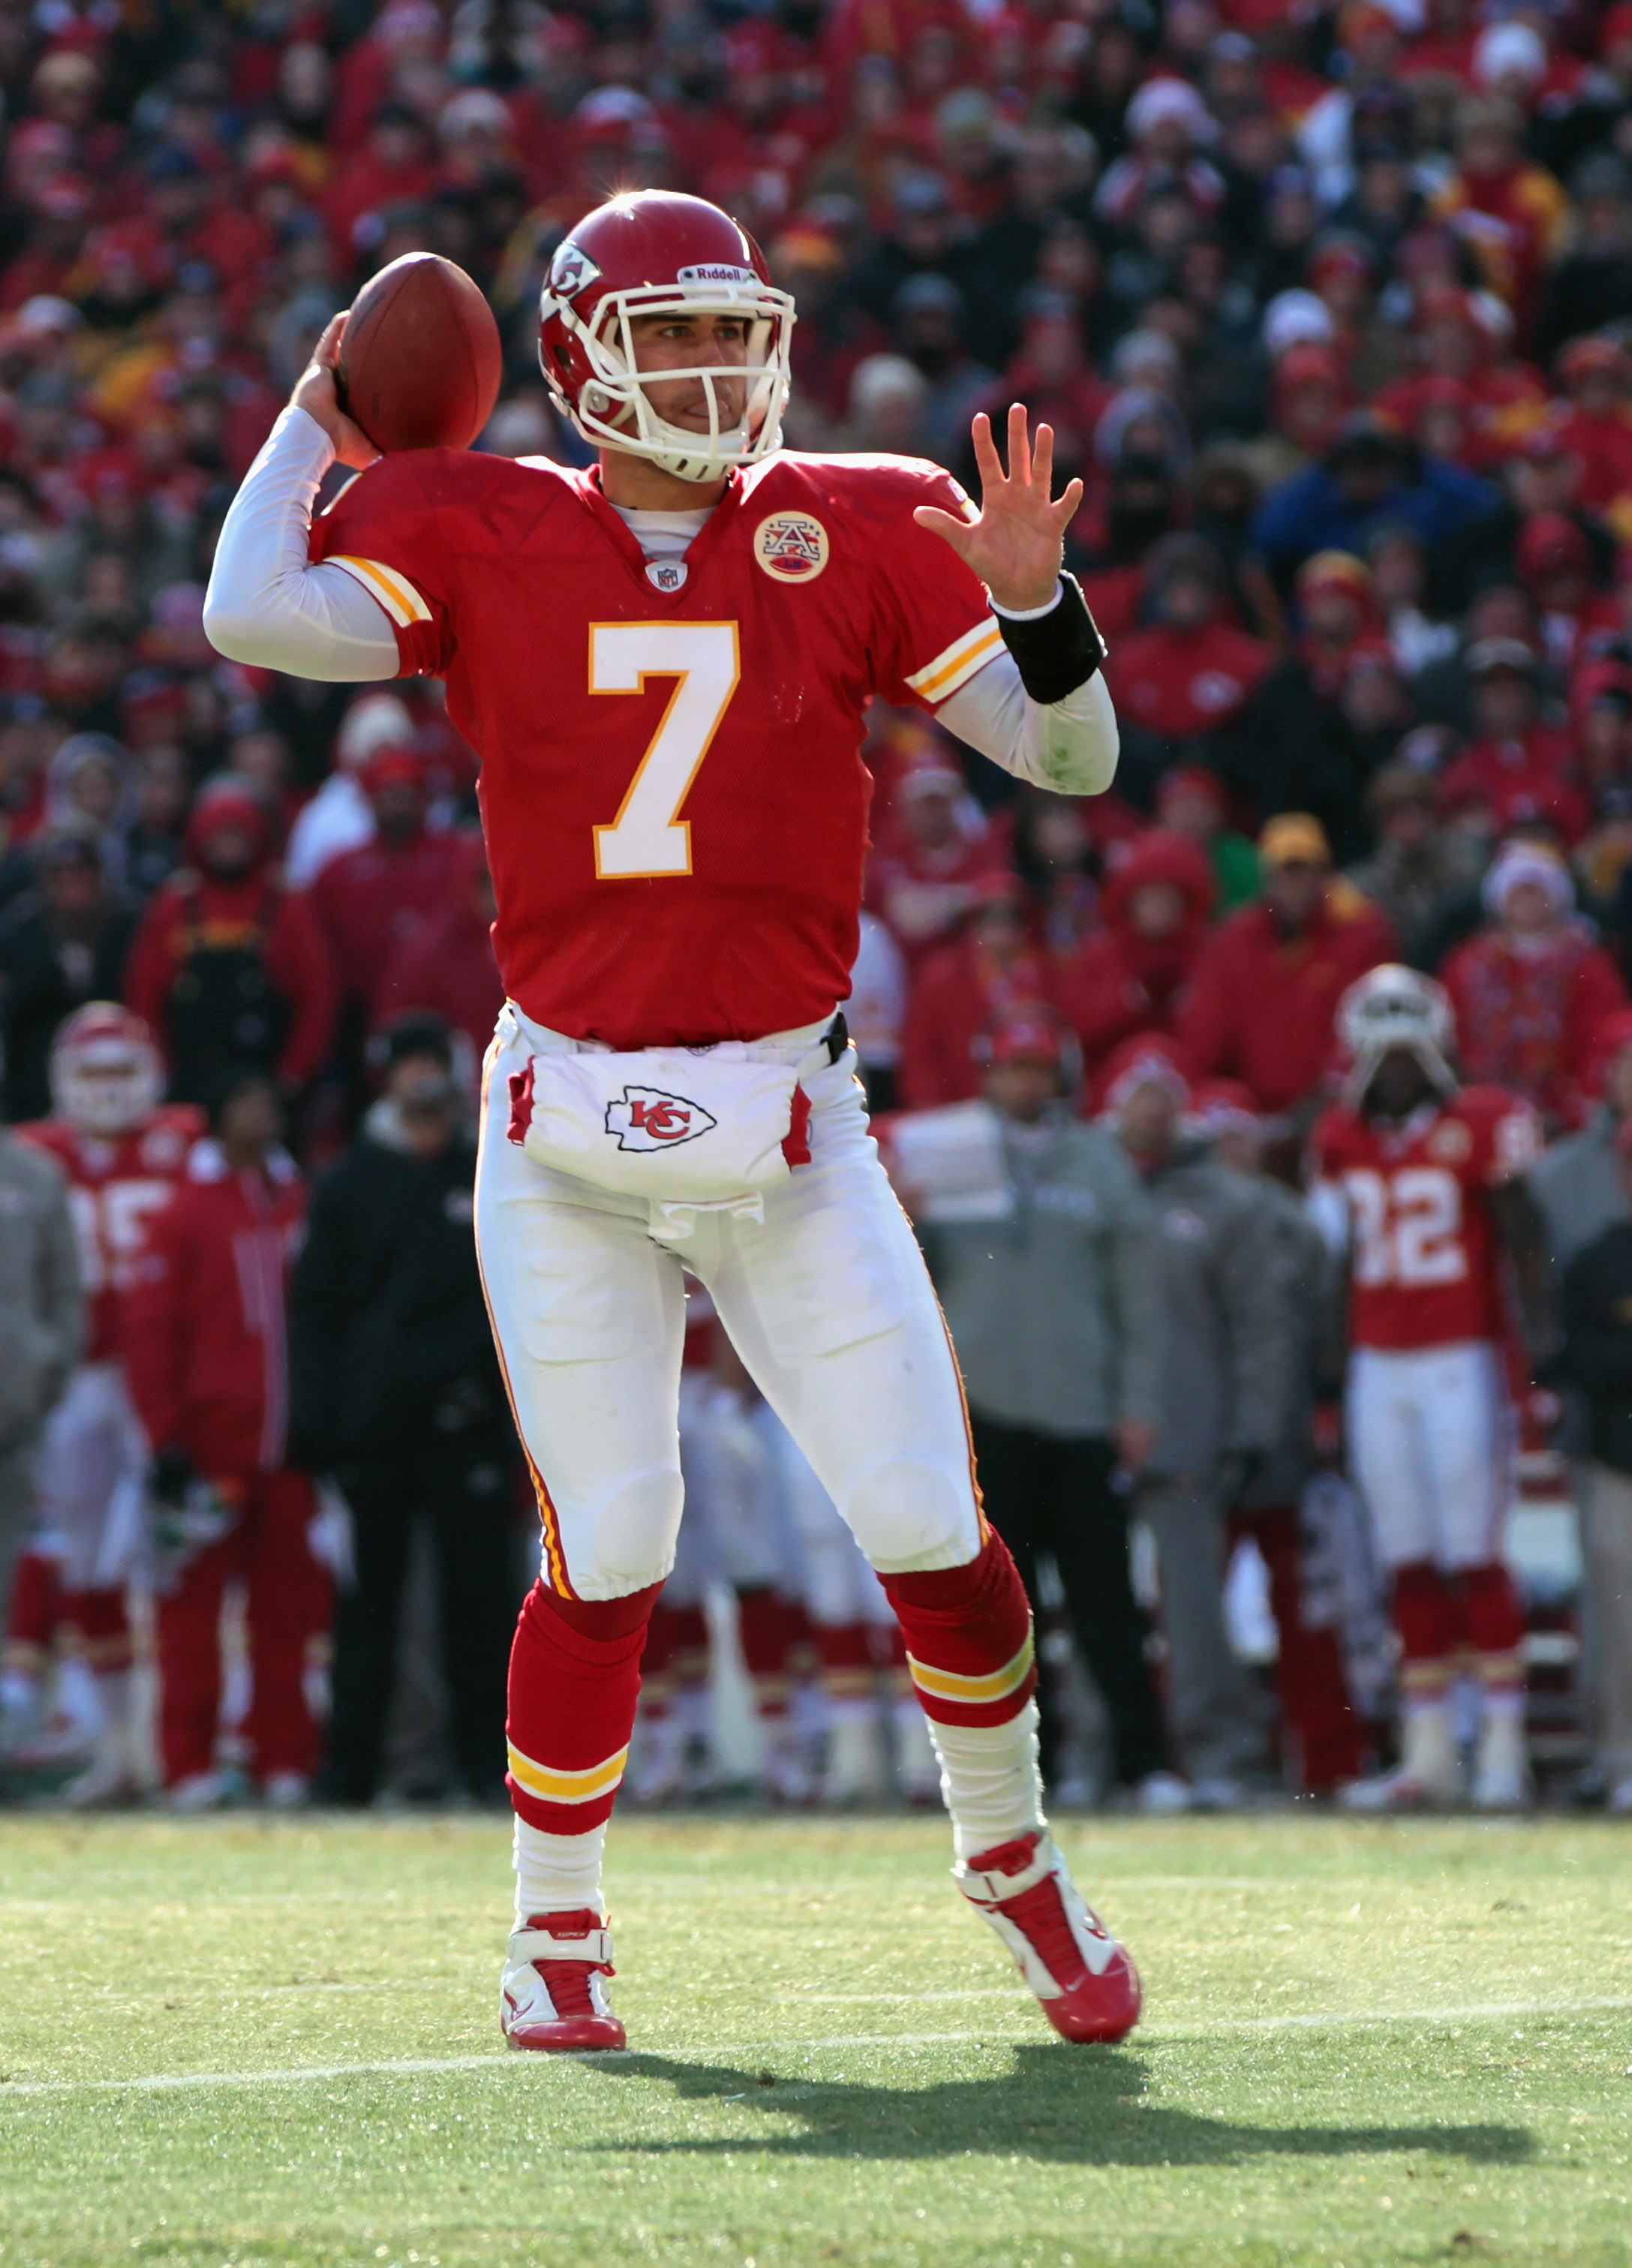 KANSAS CITY, MO - DECEMBER 05:  Quarterback Matt Cassel #7 of the Kansas City Chiefs in action during the game against the Denver Broncos on December 5, 2010 at Arrowhead Stadium in Kansas City, Missouri.  (Photo by Jamie Squire/Getty Images)